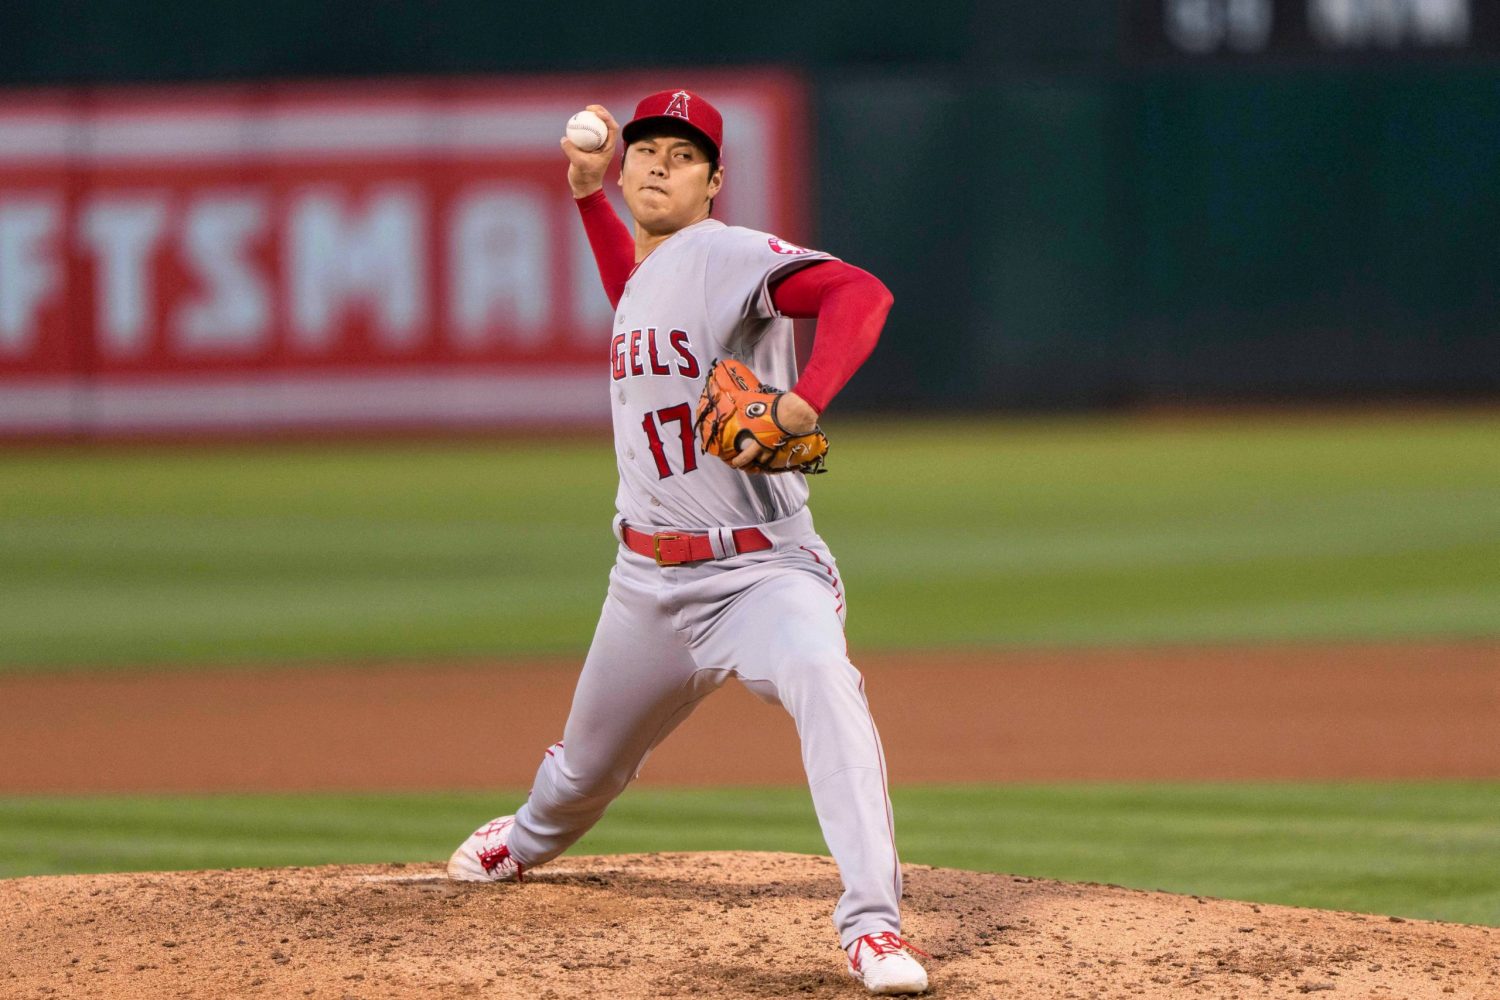 Shohei Ohtani and Japan: It's much more than just baseball